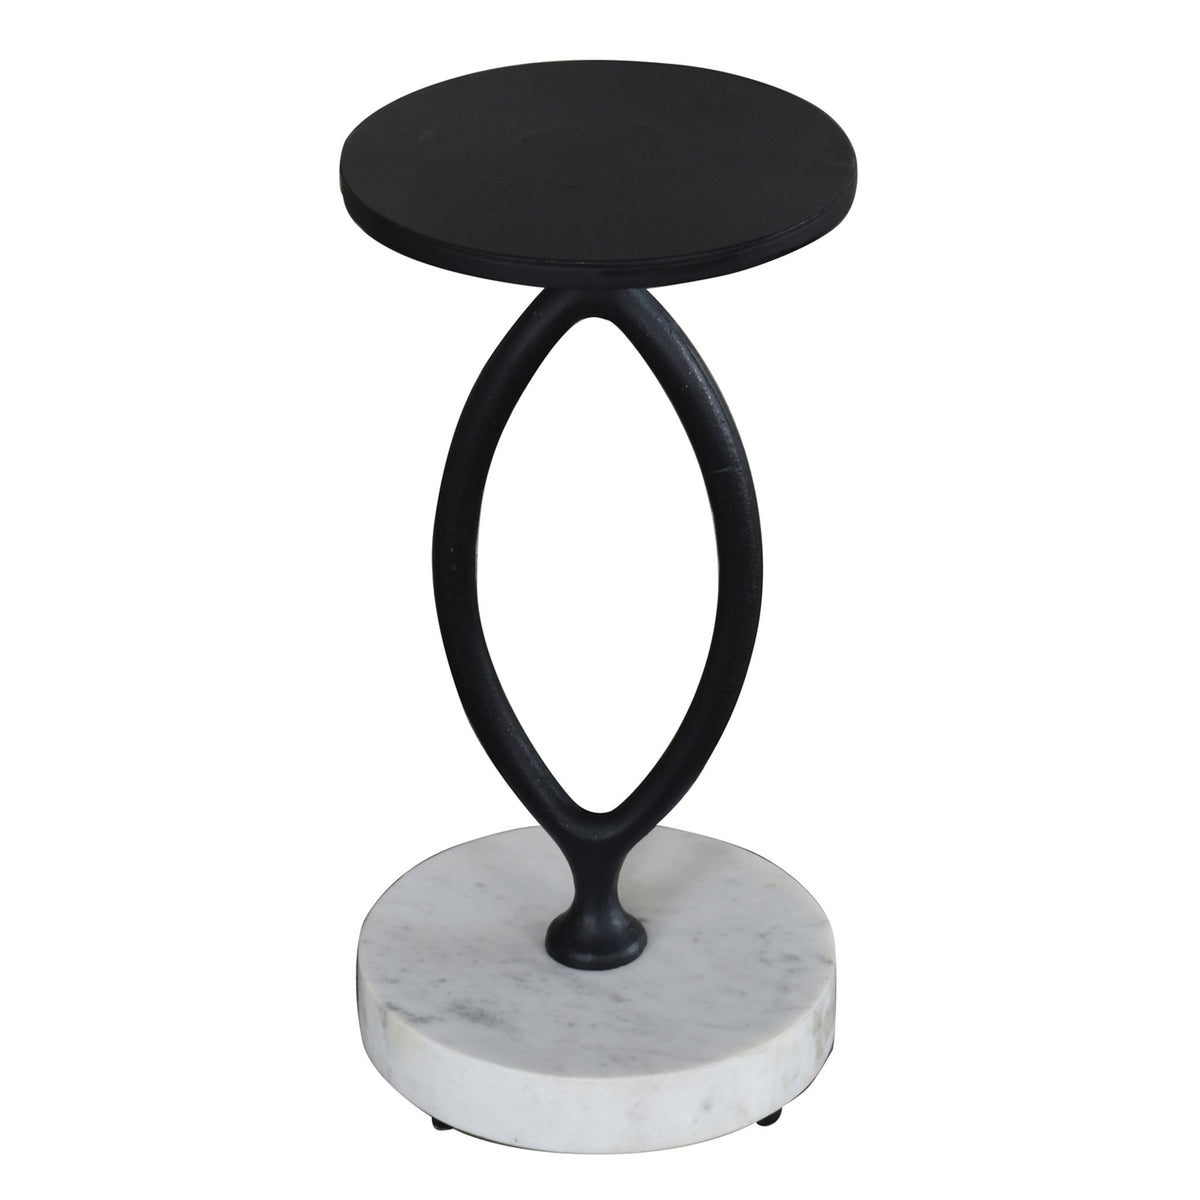 Bare Decor Aztec Table in Black Metal with White Marble Stone Base